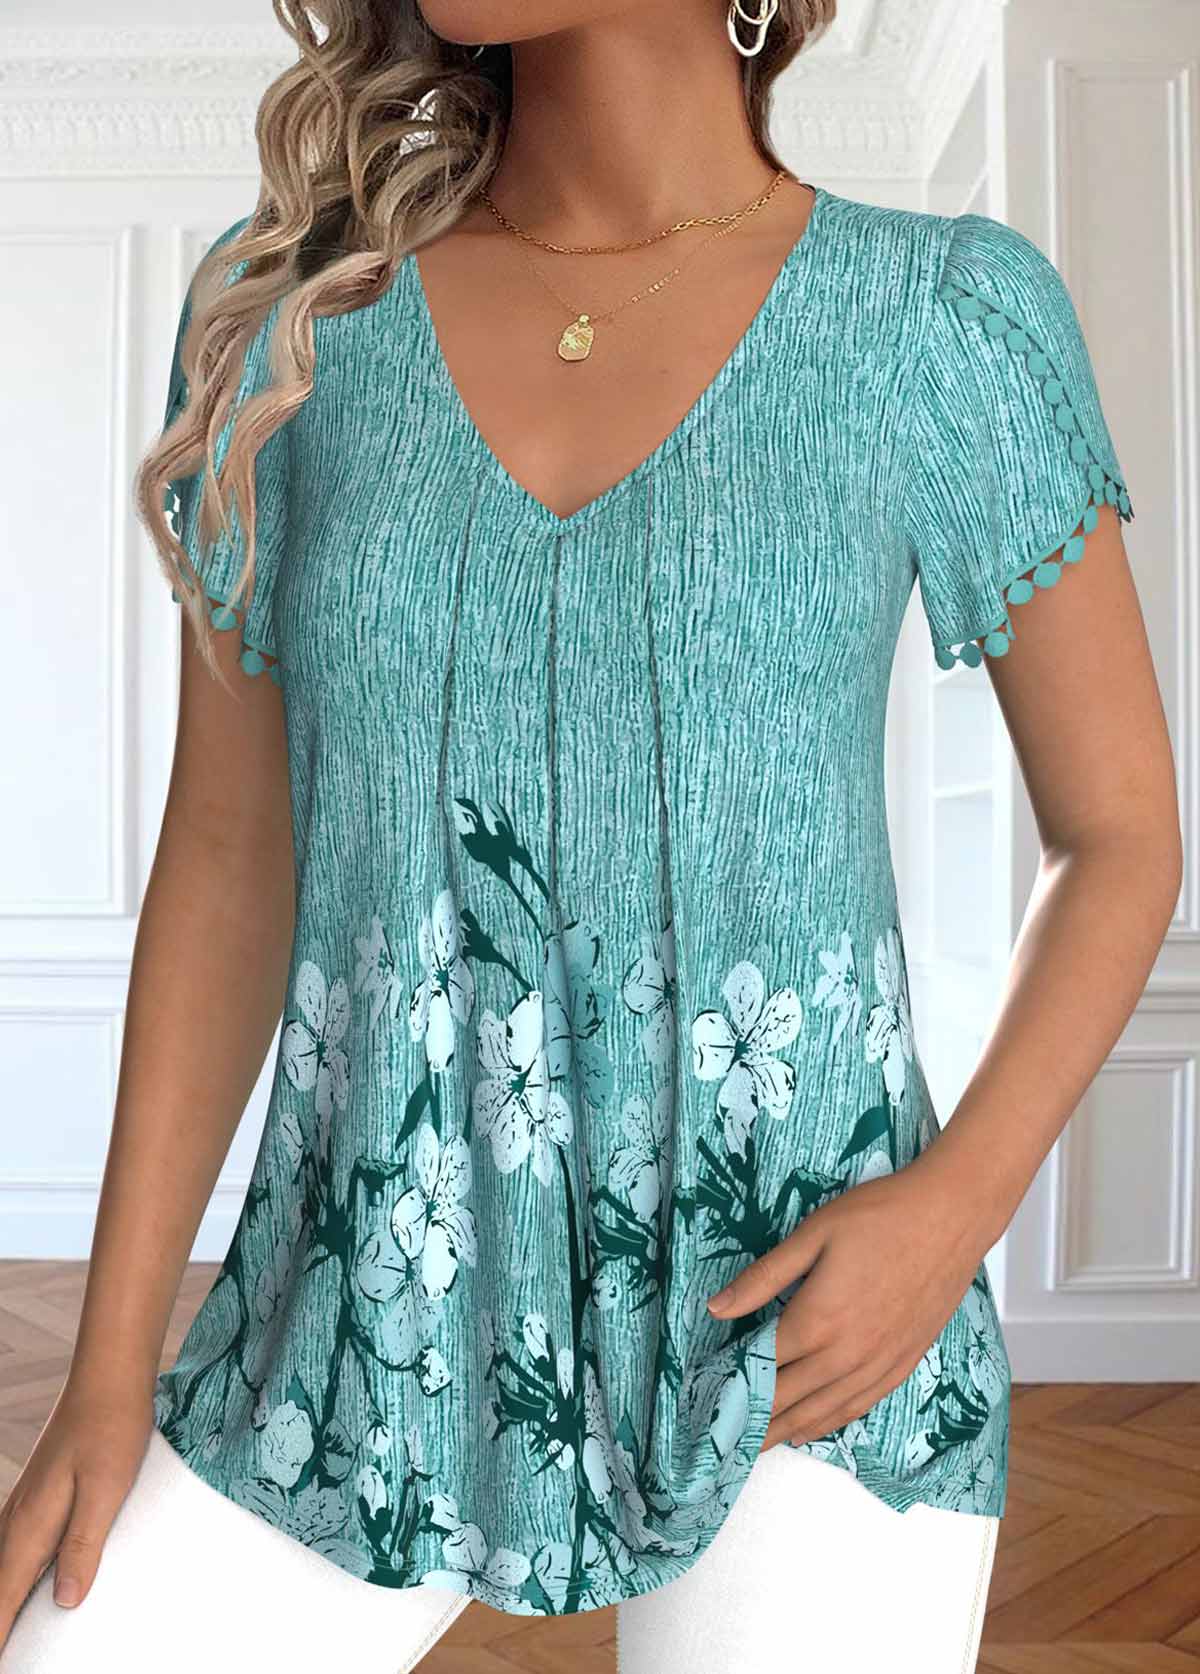 Floral Print Embroidery Mint Green Short Sleeve T Shirt